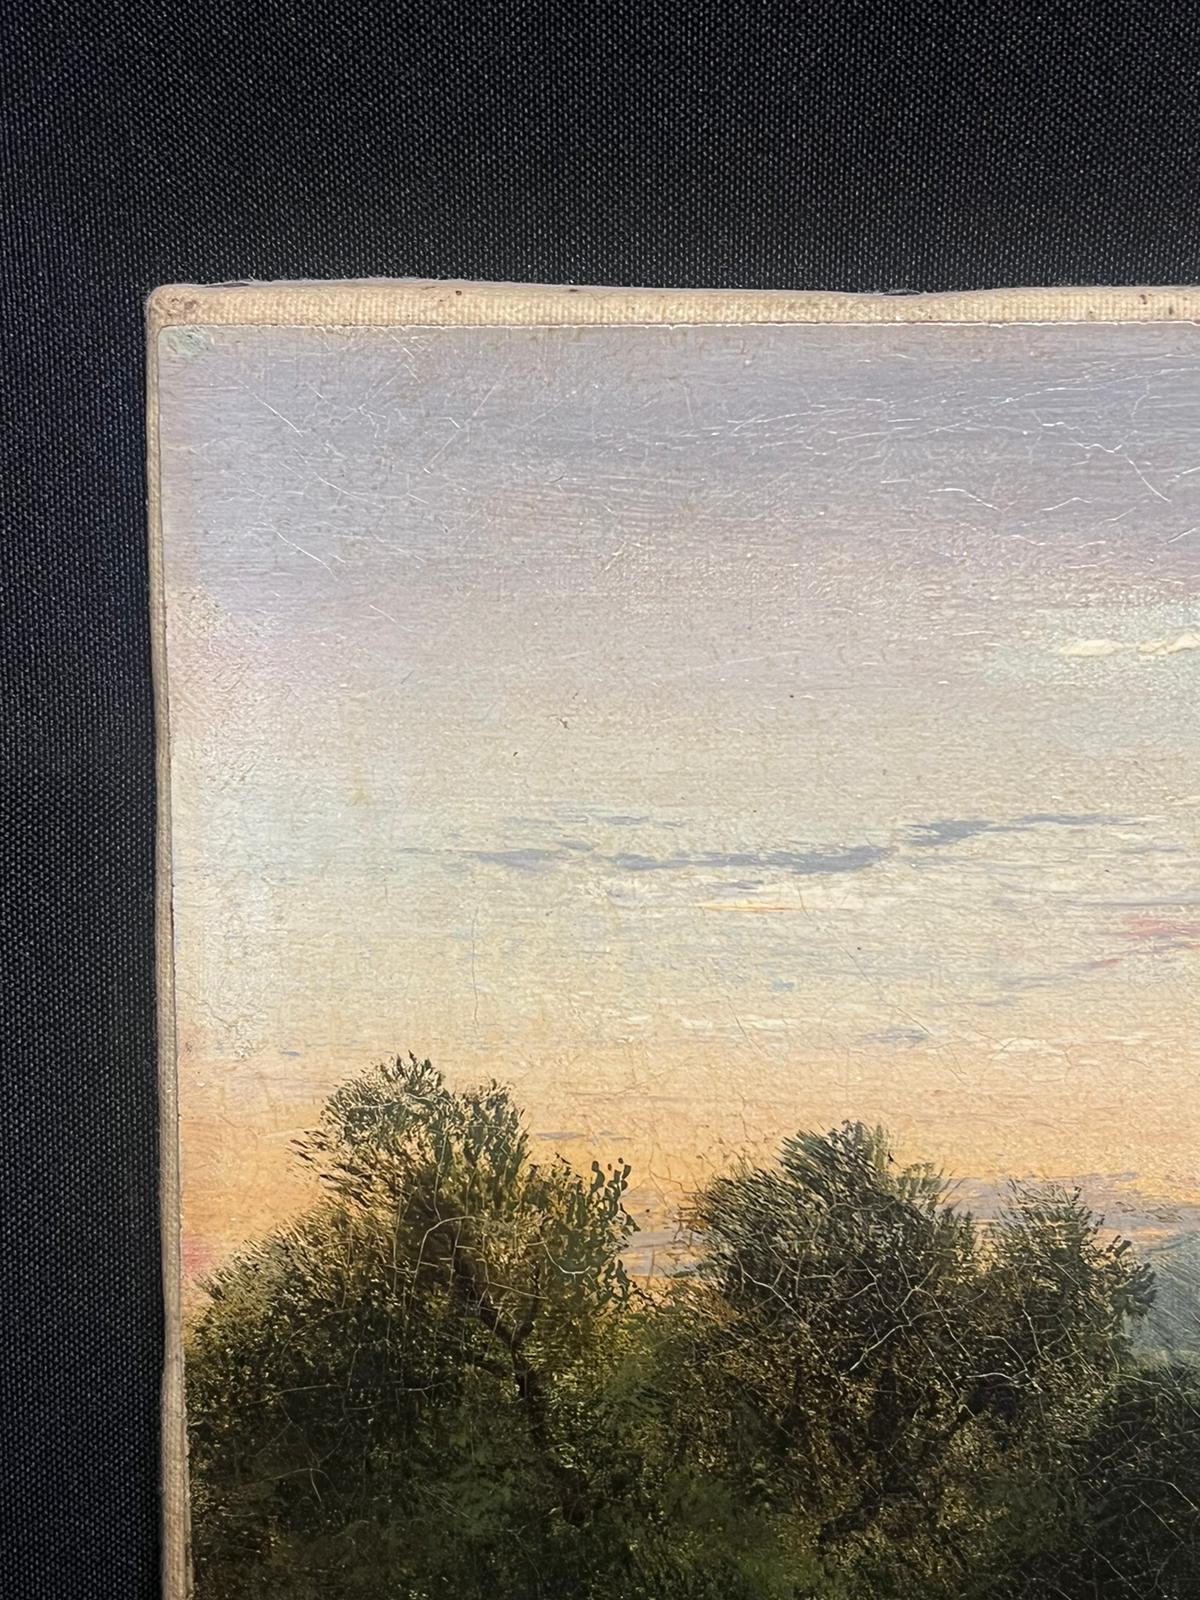 The Close of Day
British School, mid 19th century
oil on canvas, unframed
canvas: 10 x 14 inches
provenance: private collection, England with old receipt/ invoice paperwork. 
condition: very good and sound condition 